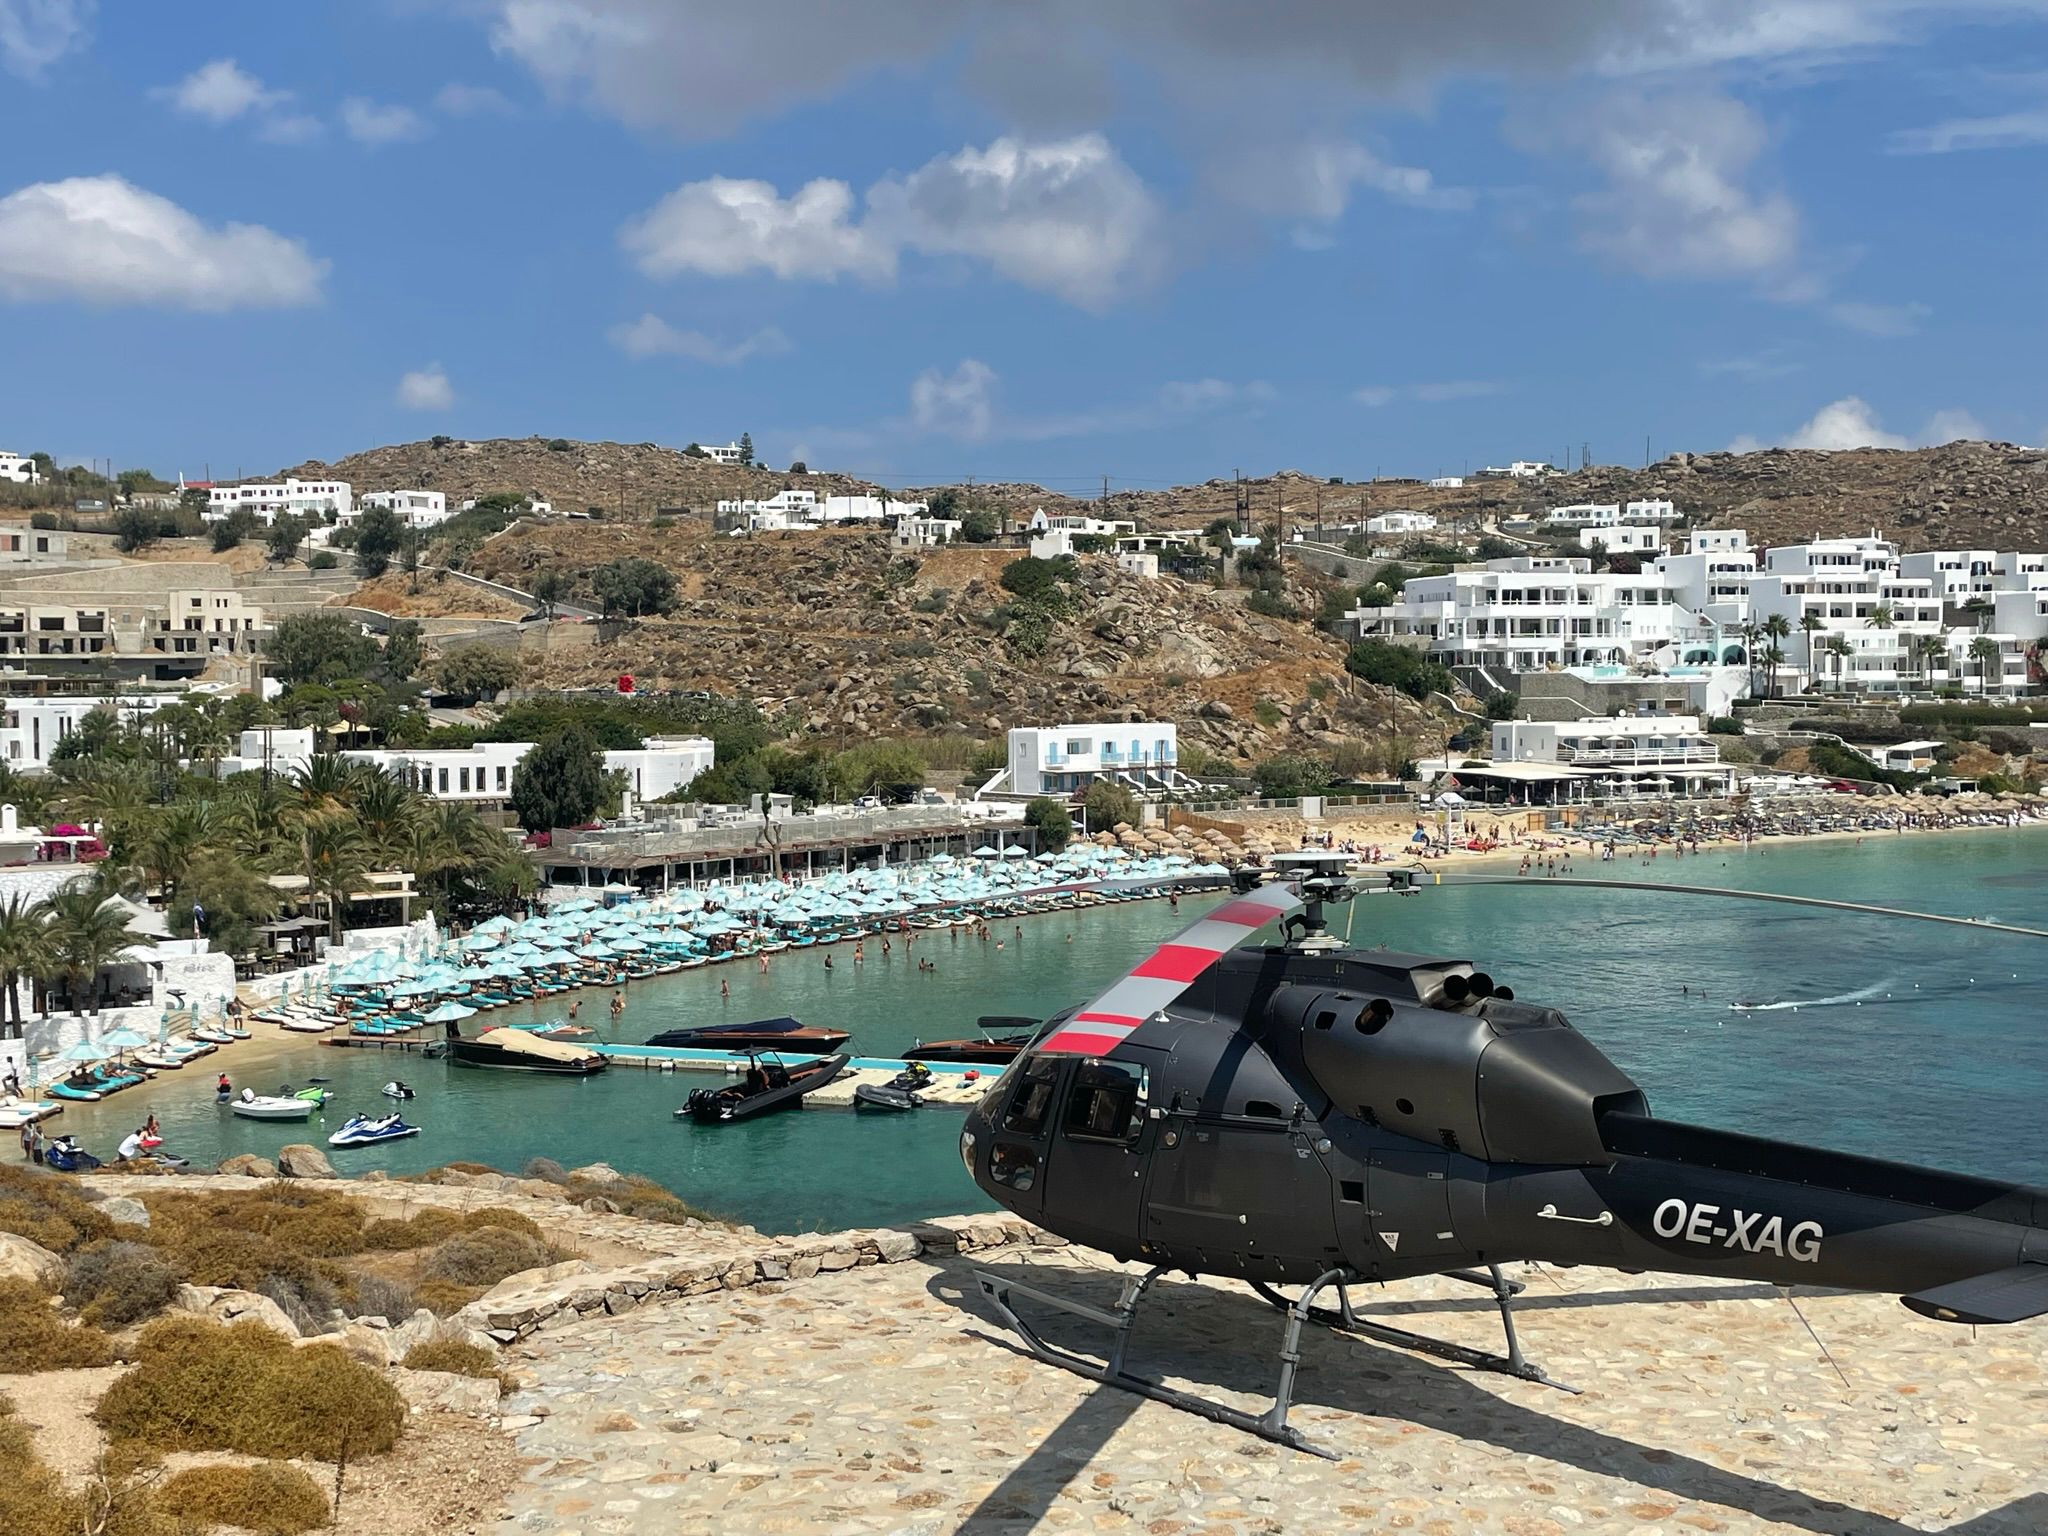 A landed helicopter, and a view of a beach